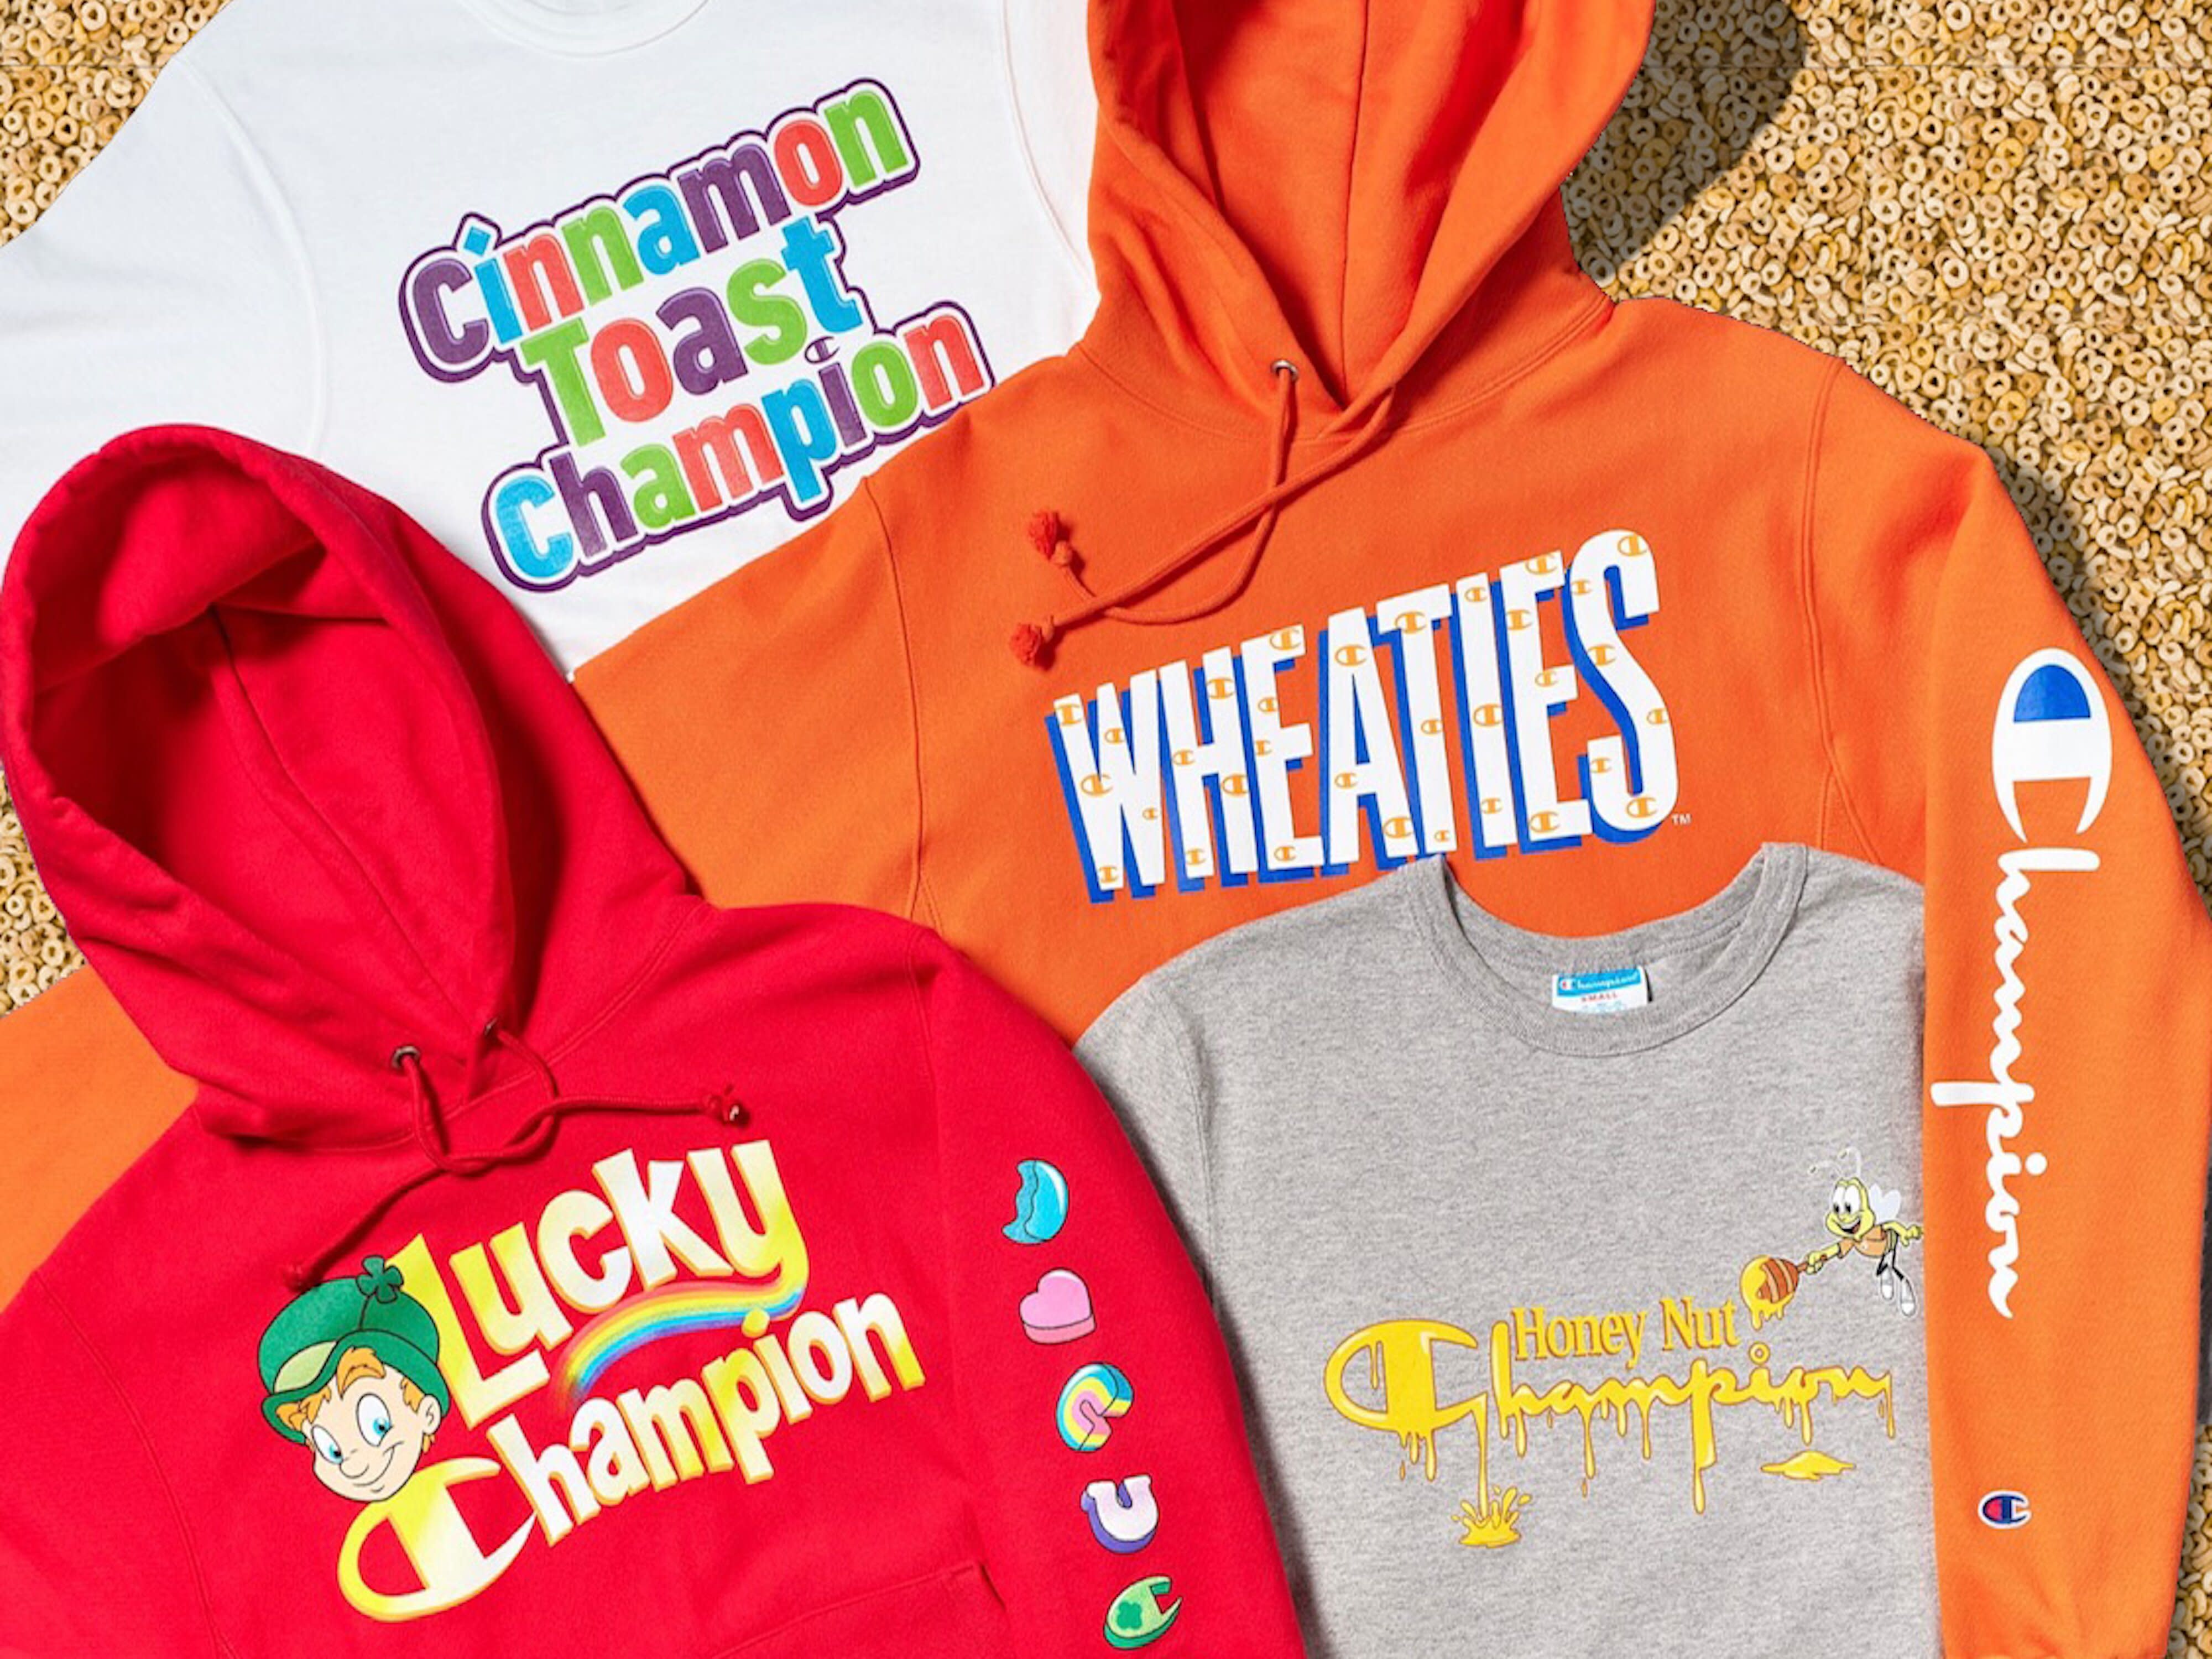 Champion and General Mills Team Up for 